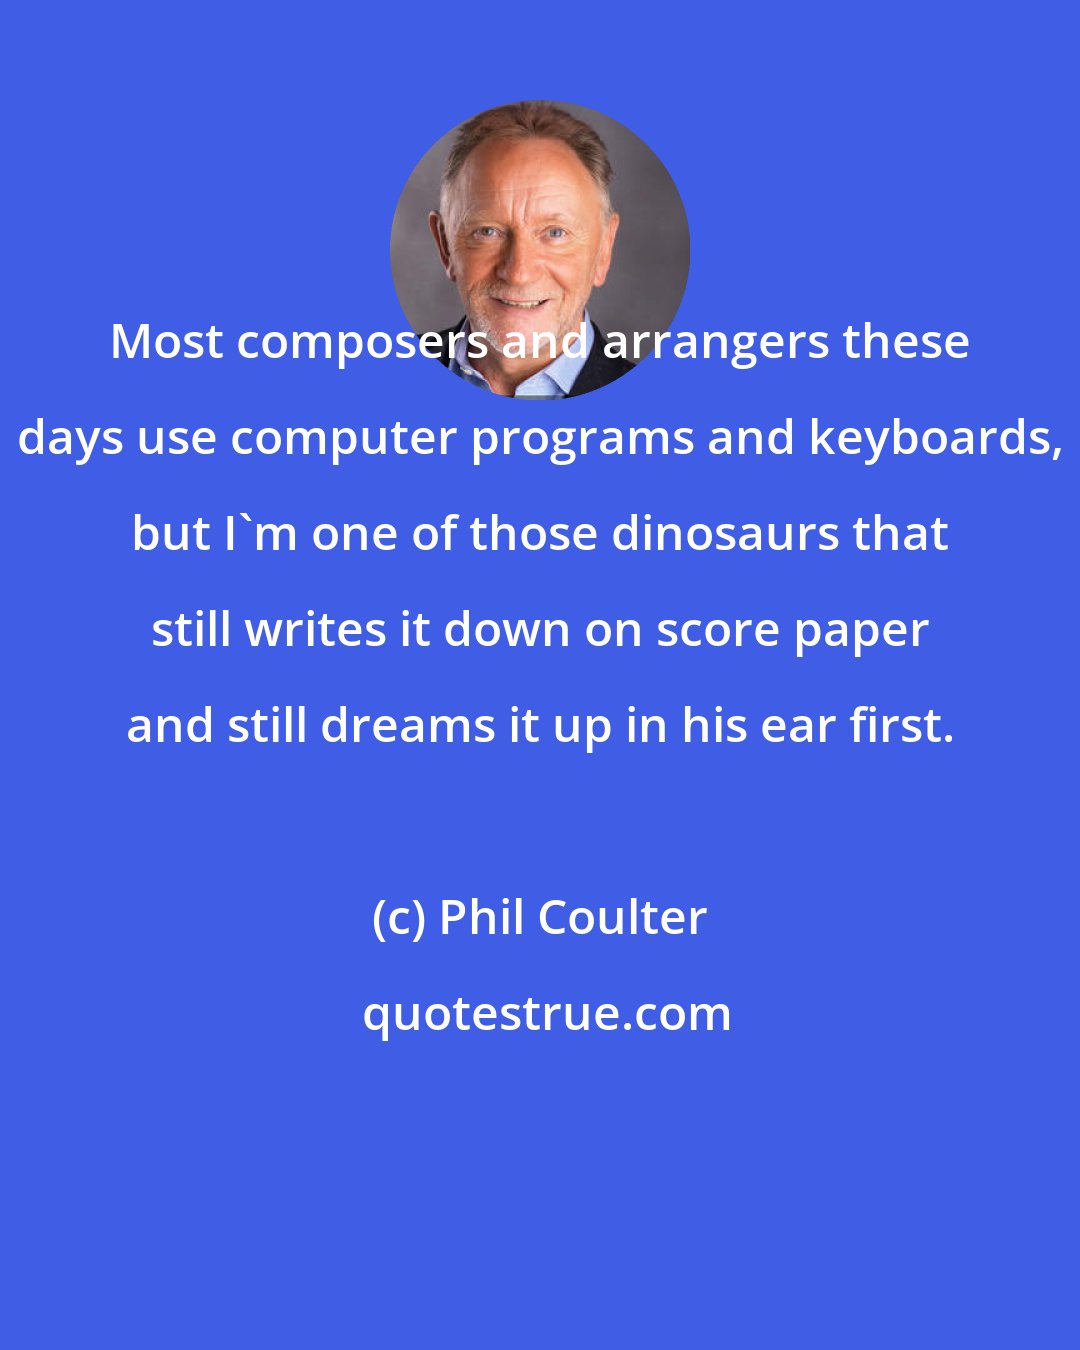 Phil Coulter: Most composers and arrangers these days use computer programs and keyboards, but I'm one of those dinosaurs that still writes it down on score paper and still dreams it up in his ear first.